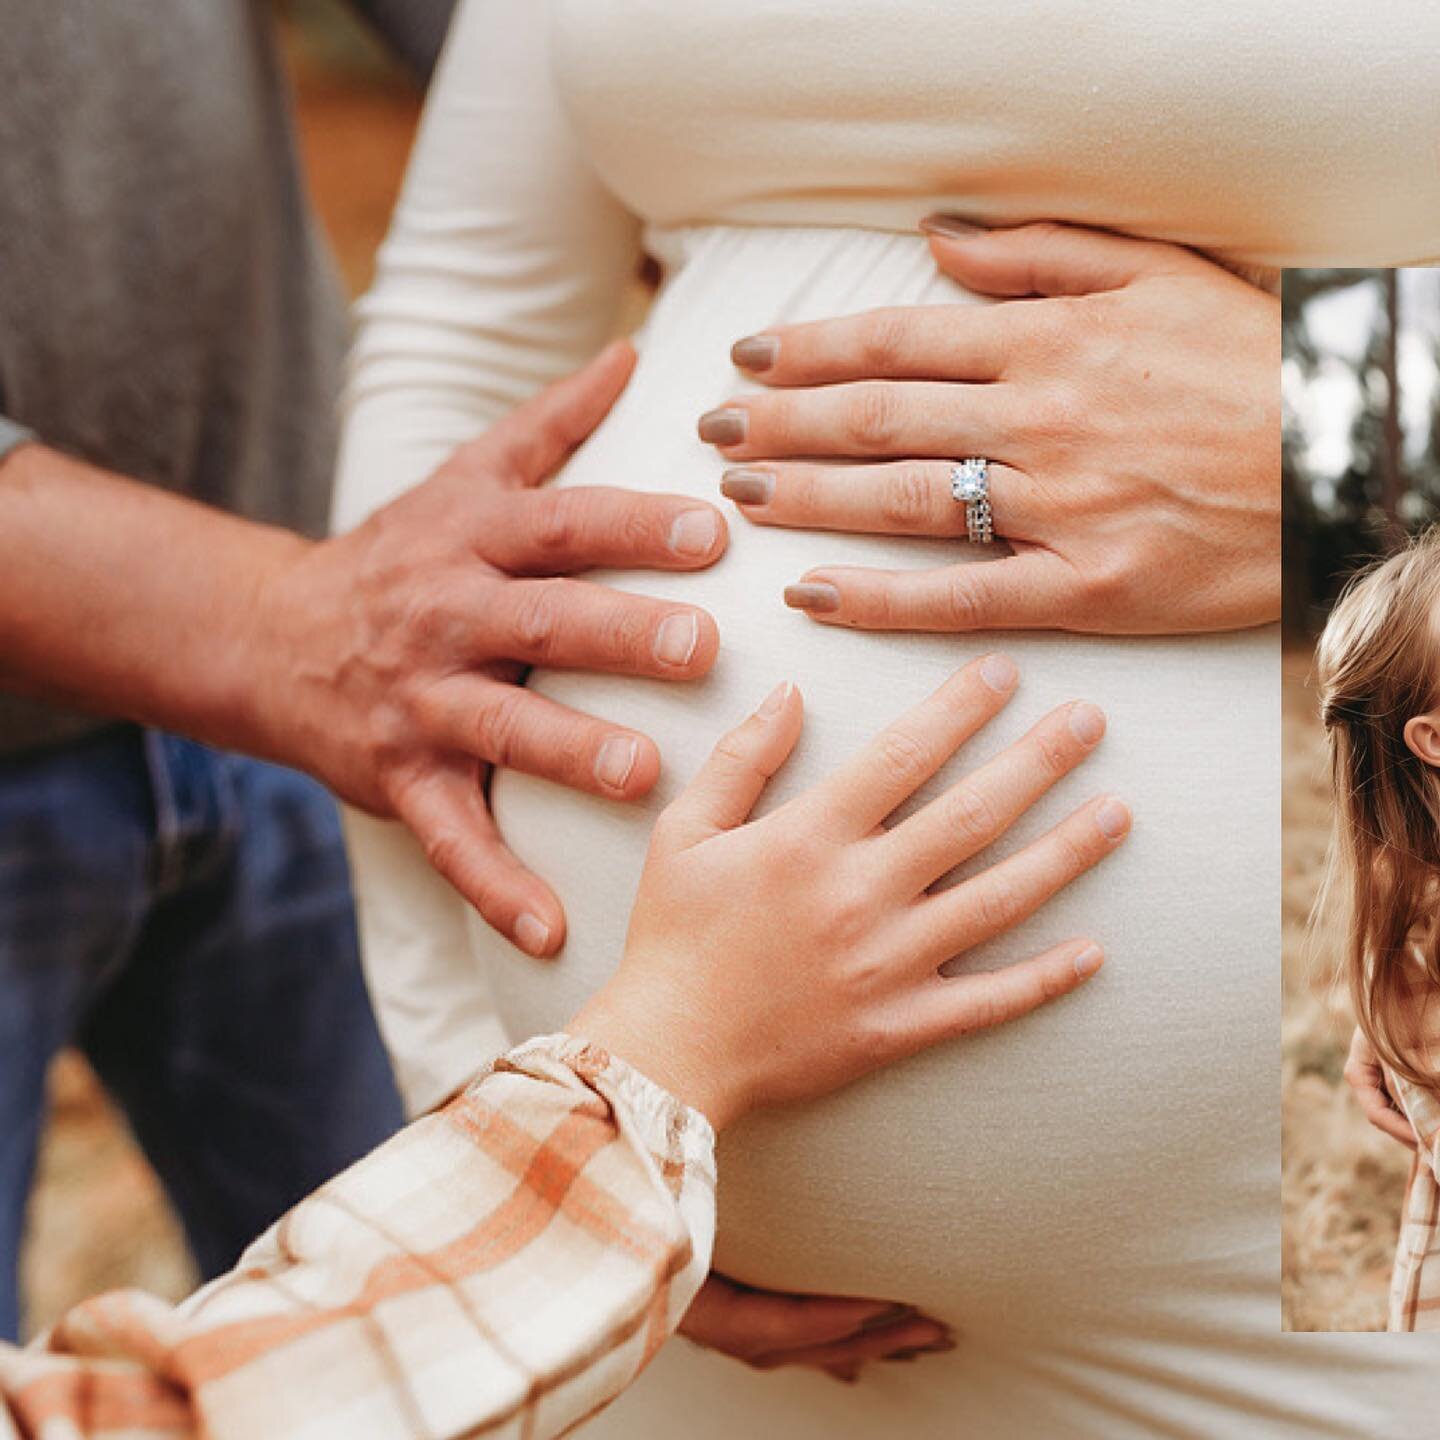 Wanna know how to make your maternity photos look intimate and effortless?? &hellip;&hellip;well here&rsquo;s my secret ((but super simple)) tip&hellip;. 

Do NOT look at my camera and never take hands off of the belly! 

It is that easy! Do this and